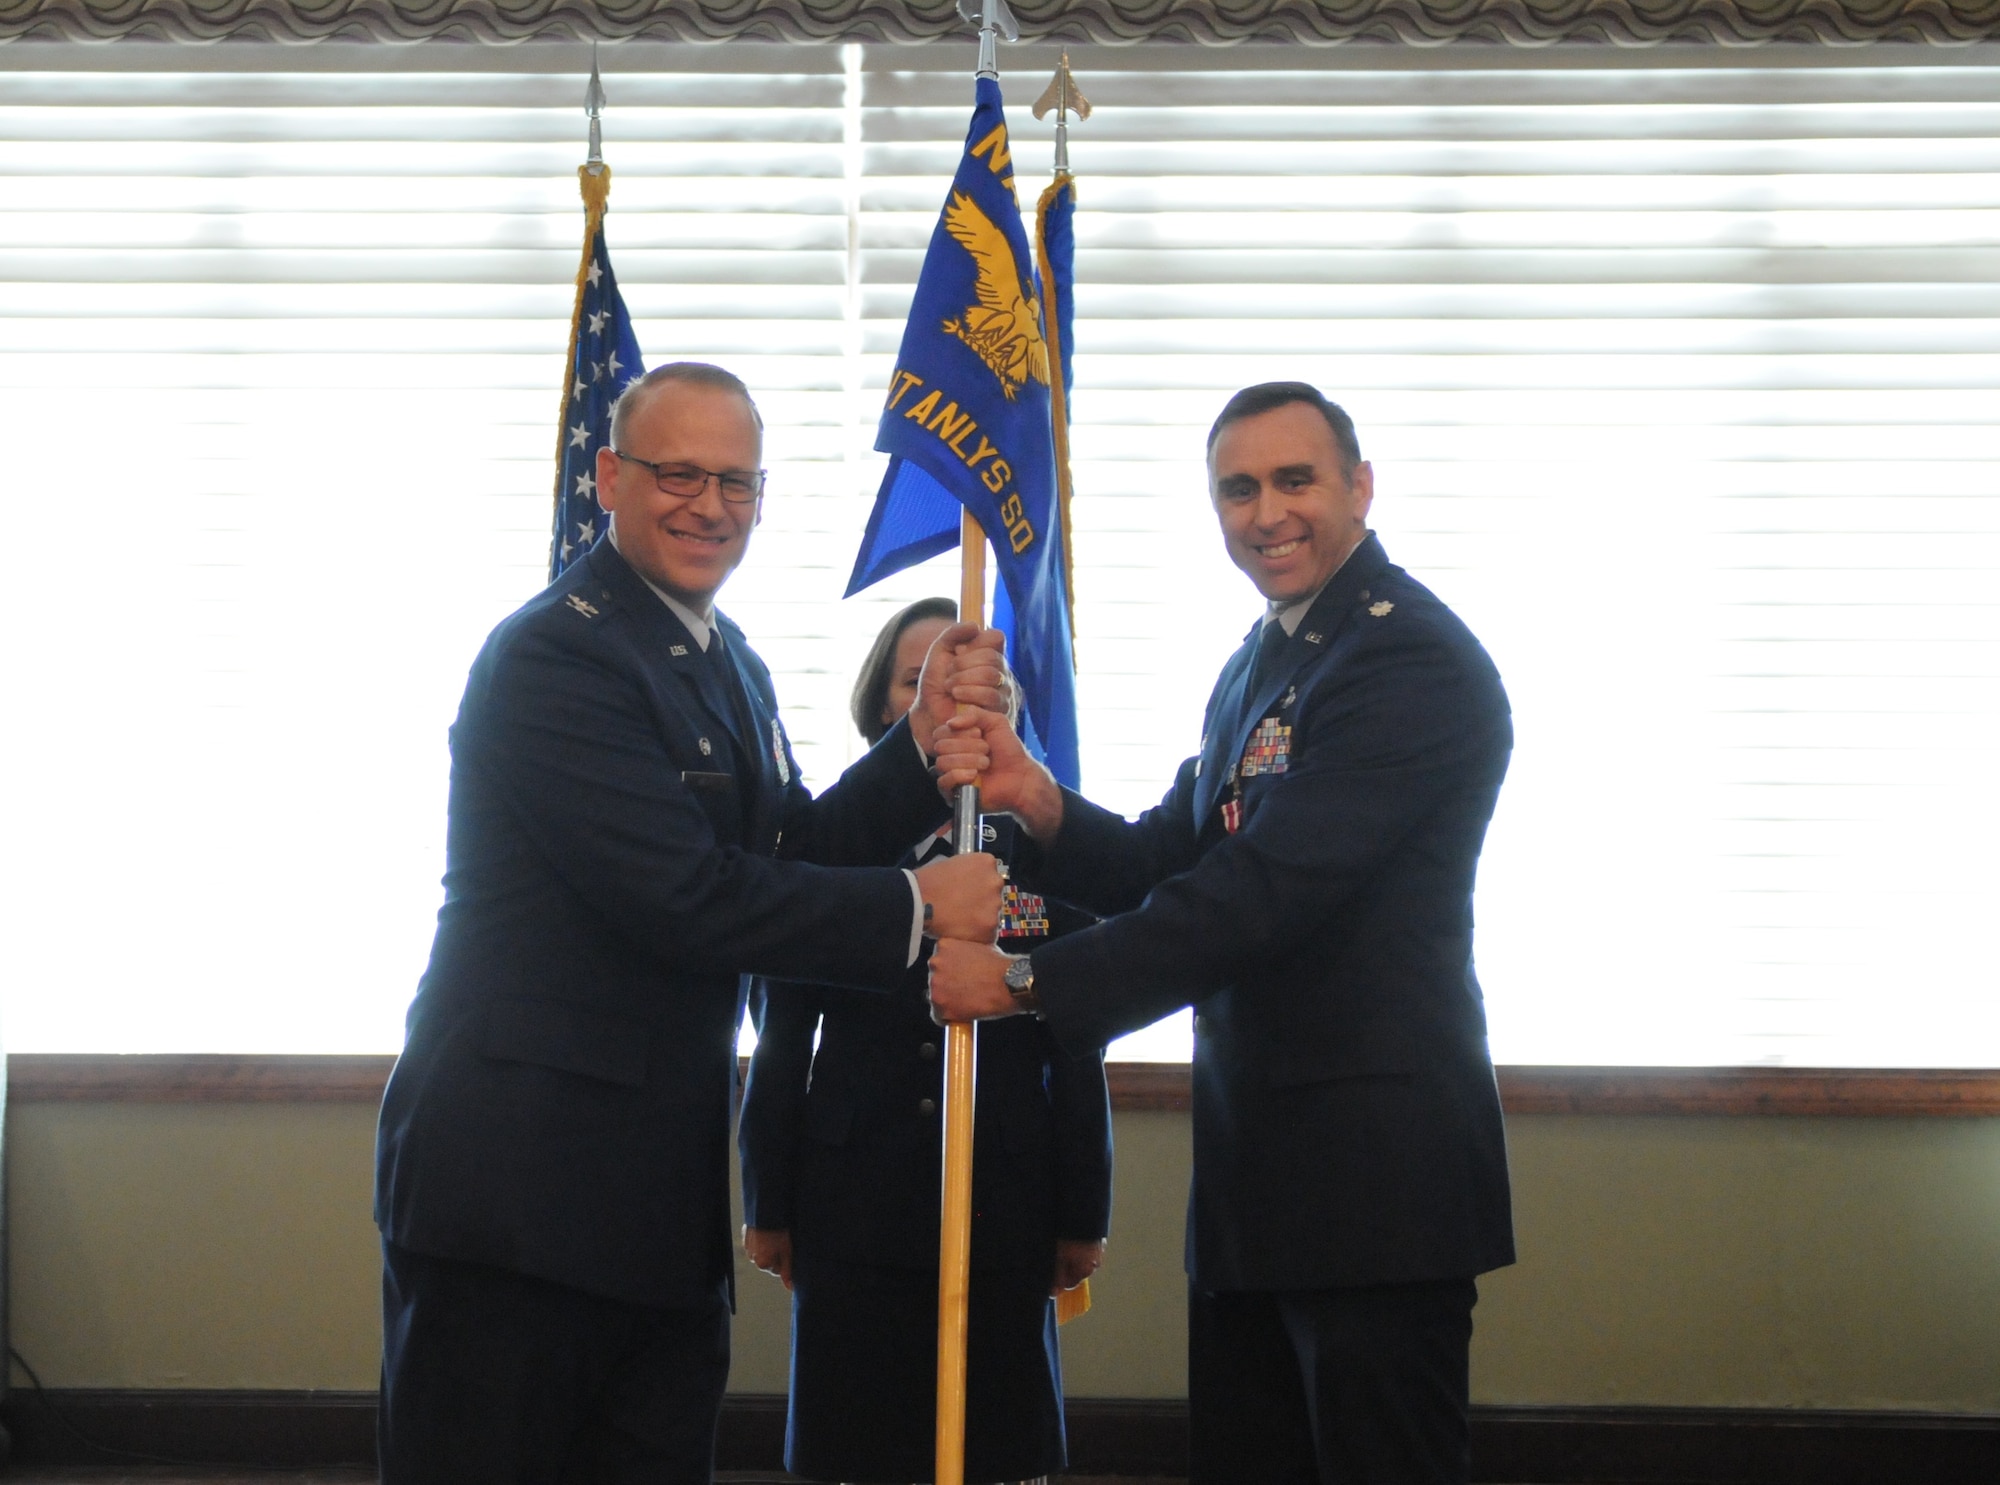 Lt. Col. Joseph Brown releases leadership of the Geospatial Intelligence Analysis squadron to Col. Steven Watts, Geospatial and Signatures Intelligence Group, at the Wright-Patterson Club, Wright-Patterson Air Force Base, Ohio, June 2, 2022. GSI creates tailored geospatially-based intelligence and capabilities to deliver decision advantage for the warfighter, policymaker, and weapon acquisition community. (U.S. Air Force photo by Staff Sergeant Caleb House)